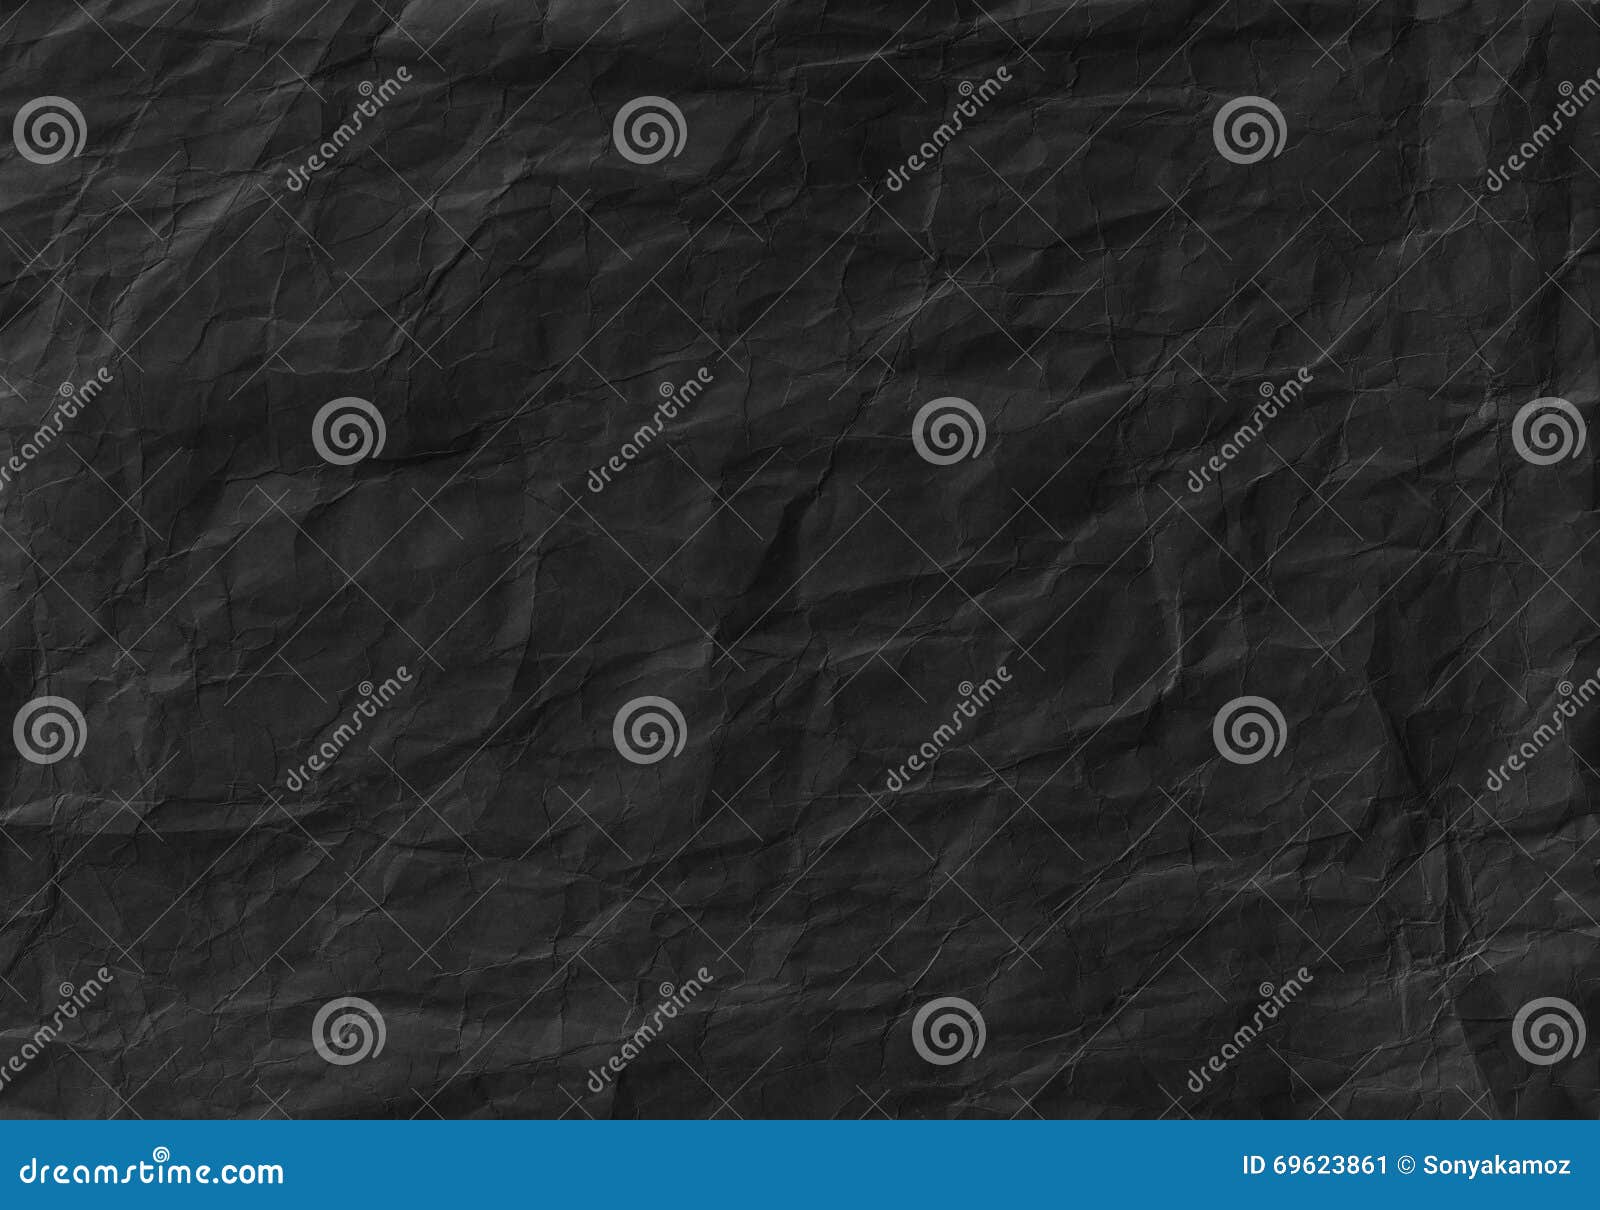 black crumpled paper texture. background and wallpaper